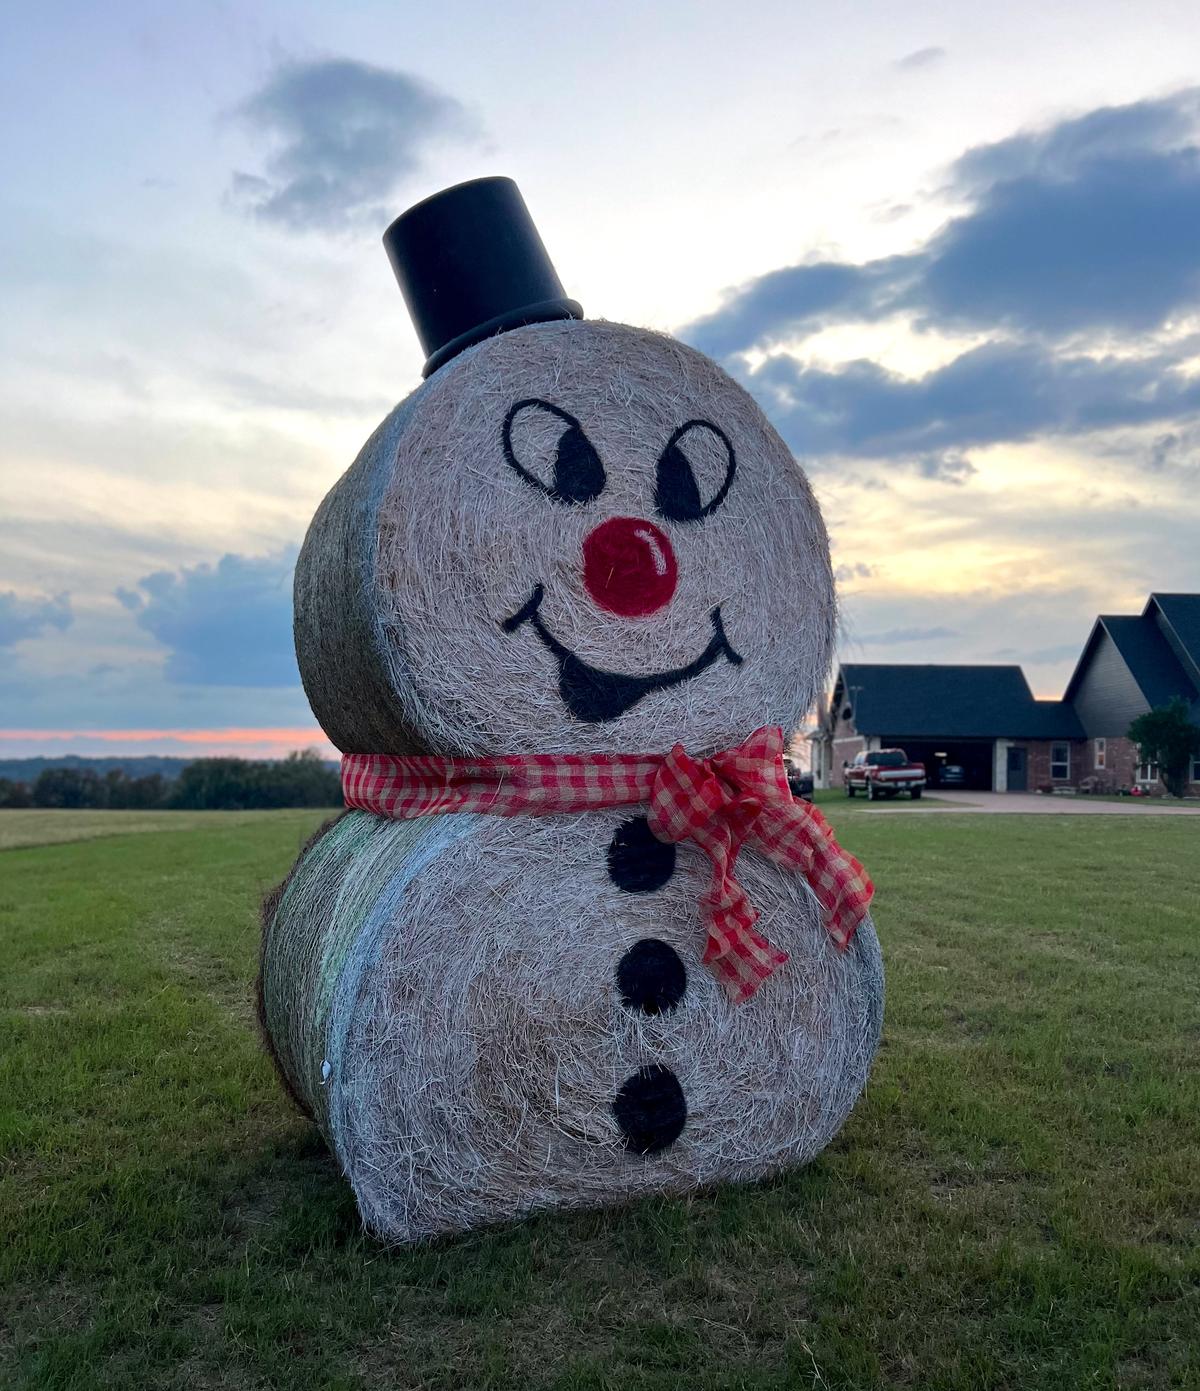 They haybale sculpture of Frosty, the snowman. (Courtesy of <a href="https://www.facebook.com/groups/320200669469831/">Melissa Kelley</a>)